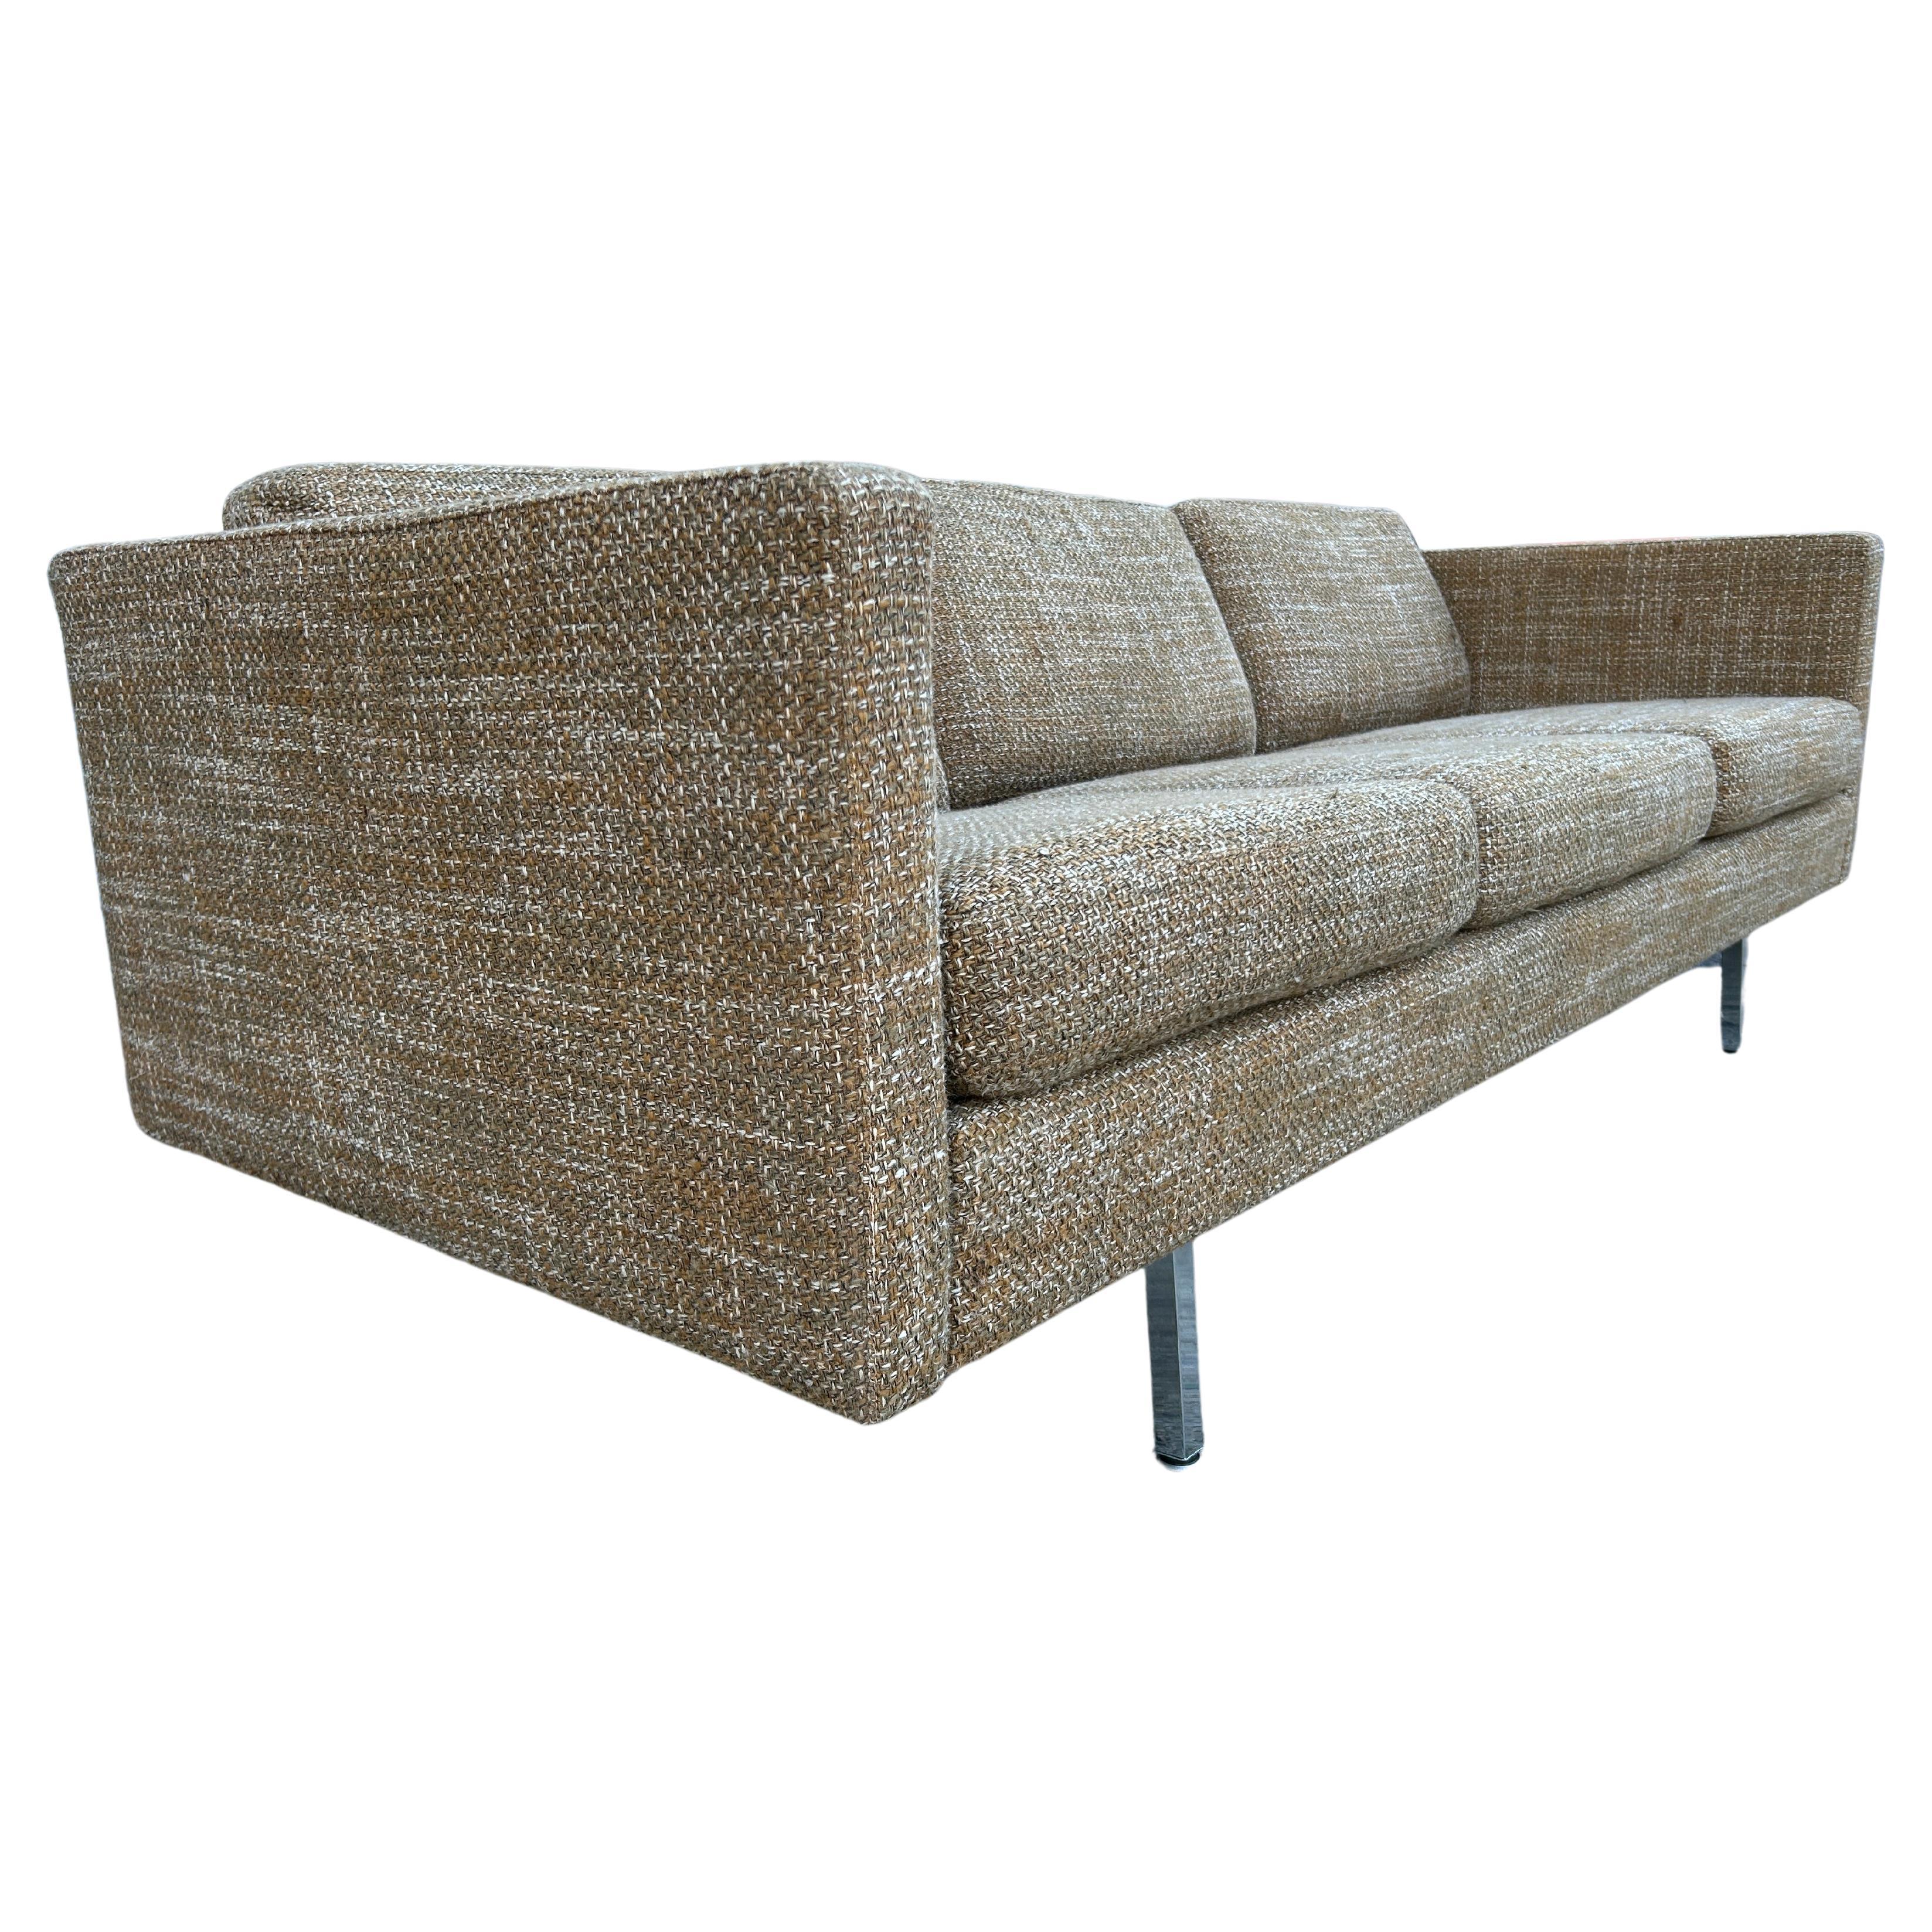 Mid-Century Modern Mid-Century Danish Modern Cube 3 Seat Sofa in Brown Woven Upholstery For Sale